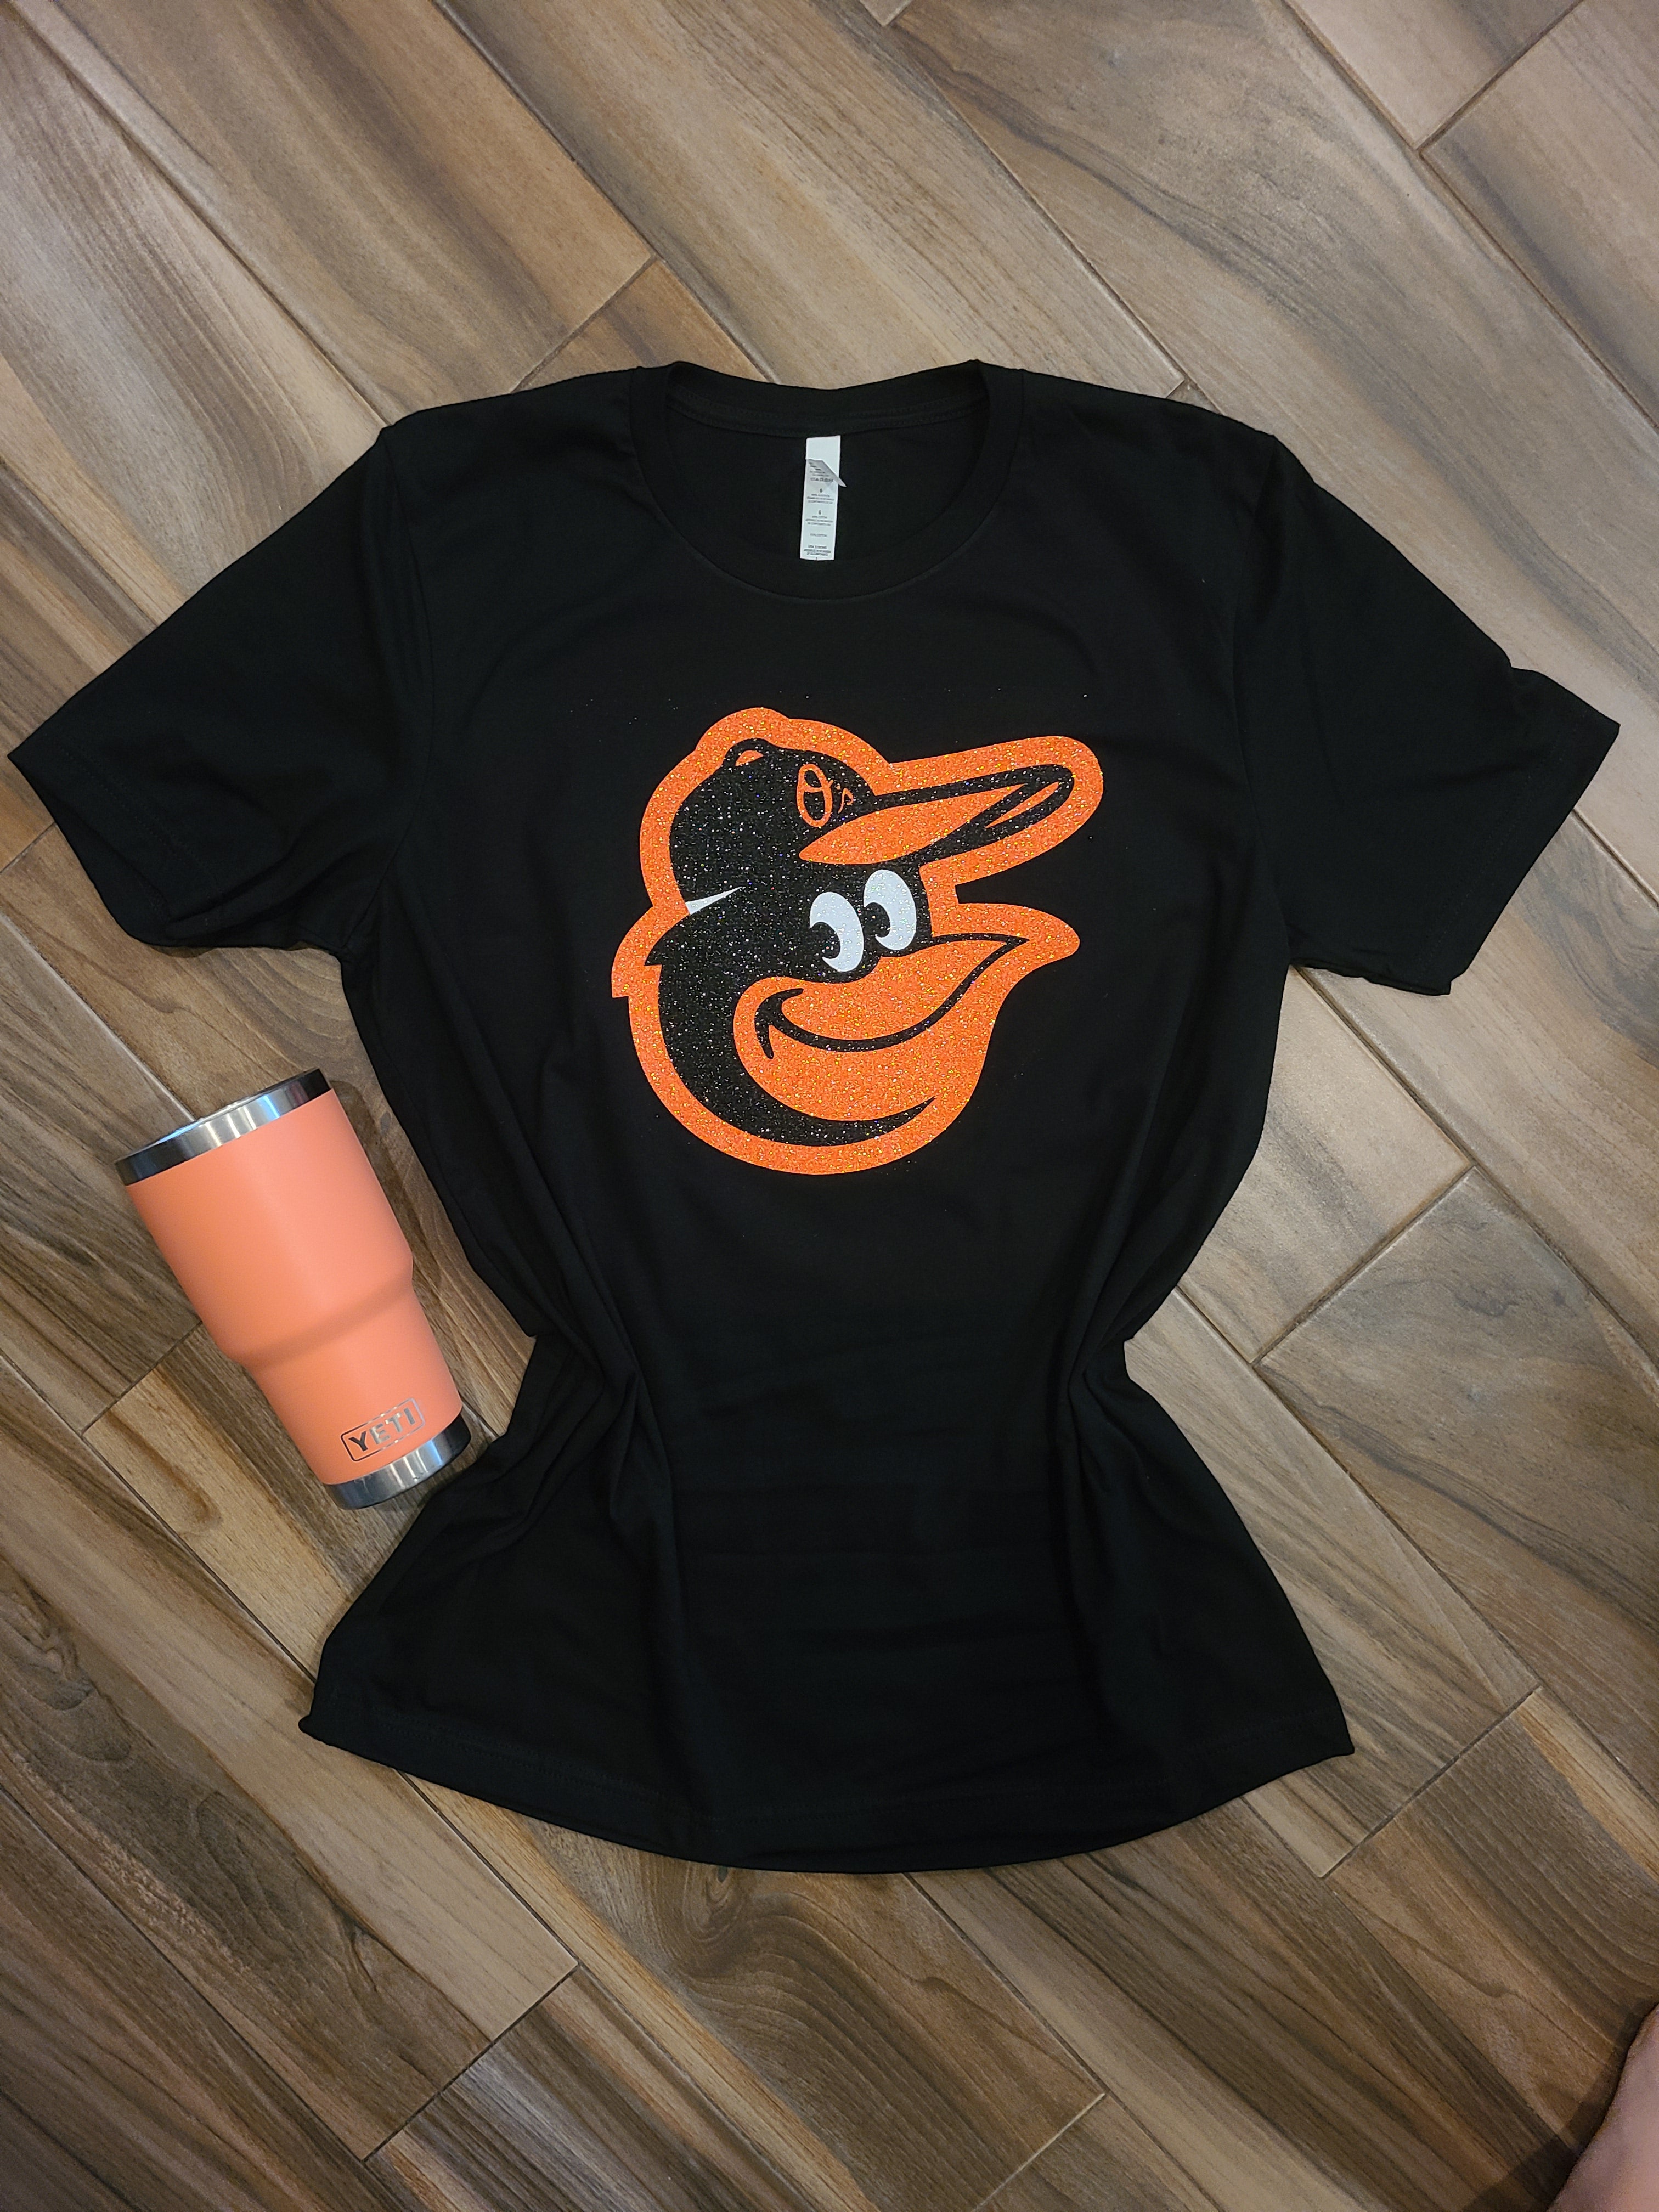 Lulu Grace Designs FCAA Orioles Shirts for FCAA Softball: Jacksonville, fl Softball Apparel for Girls & Parents X-Large / Ladies Flat Crew Neck Tee